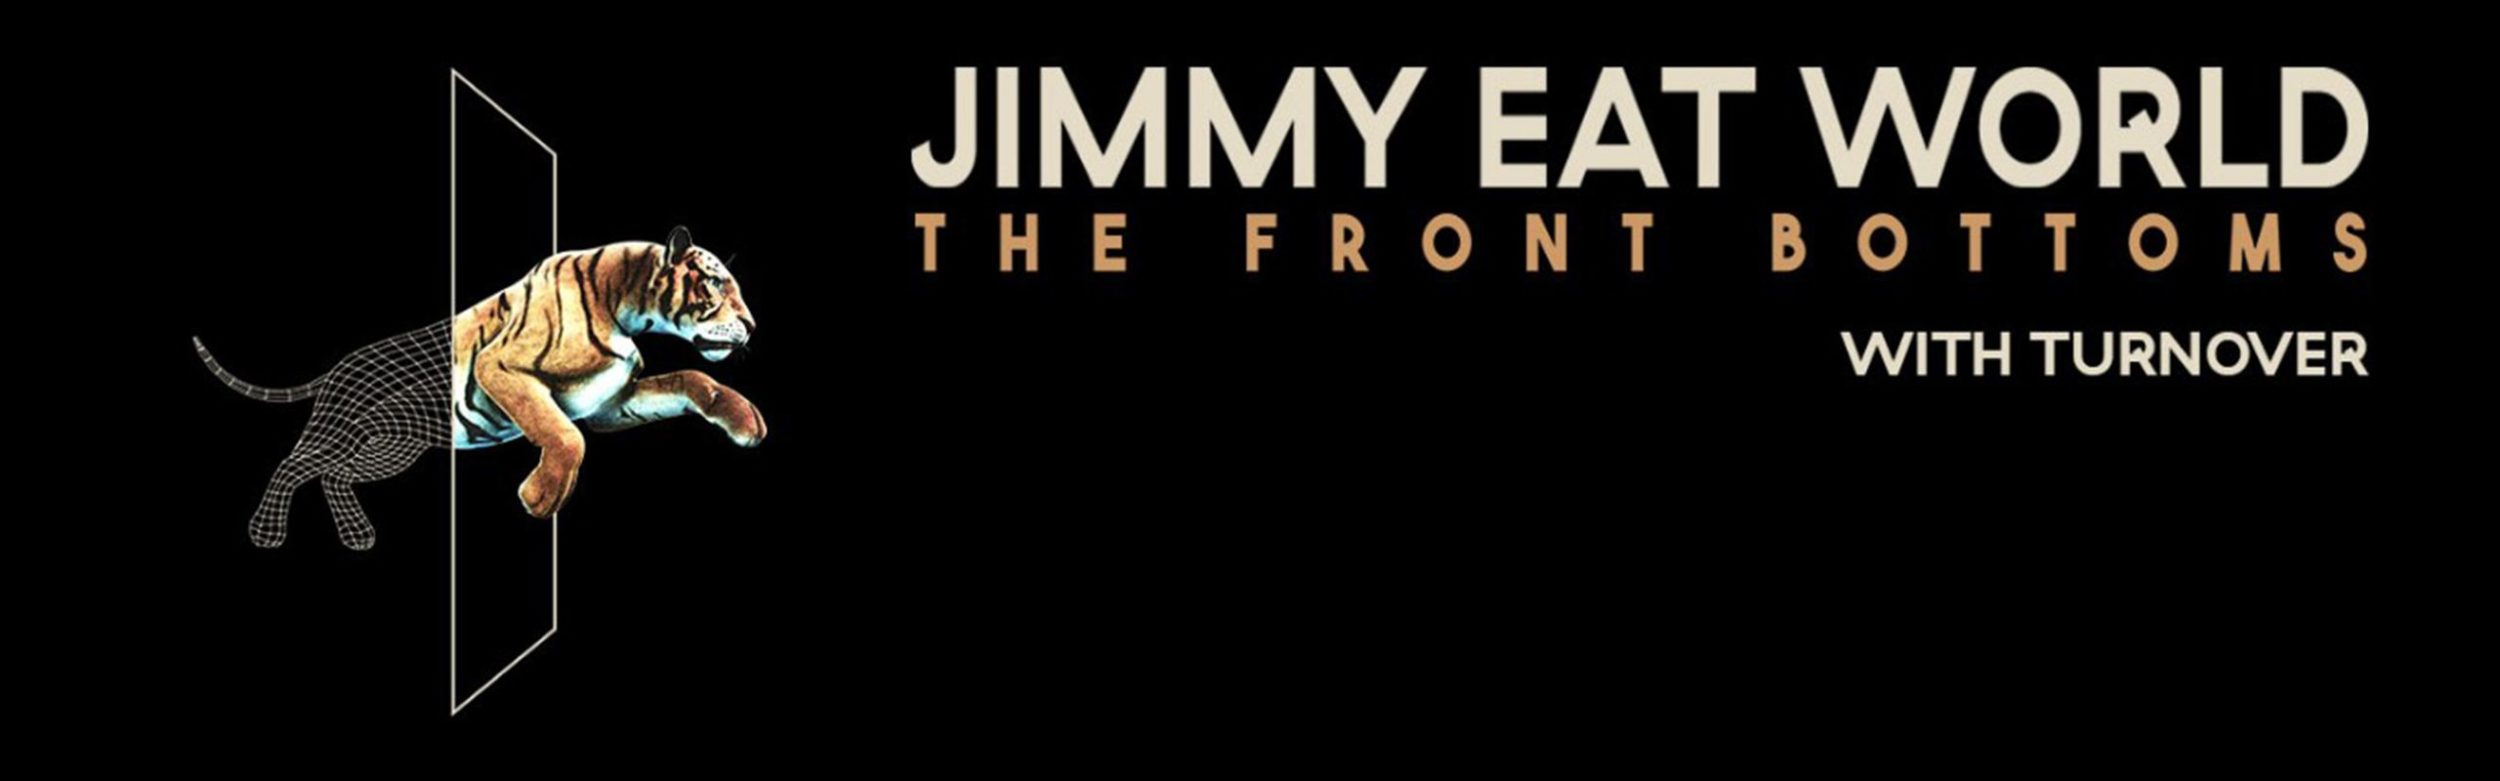 Jimmy Eat World & The Front Bottoms